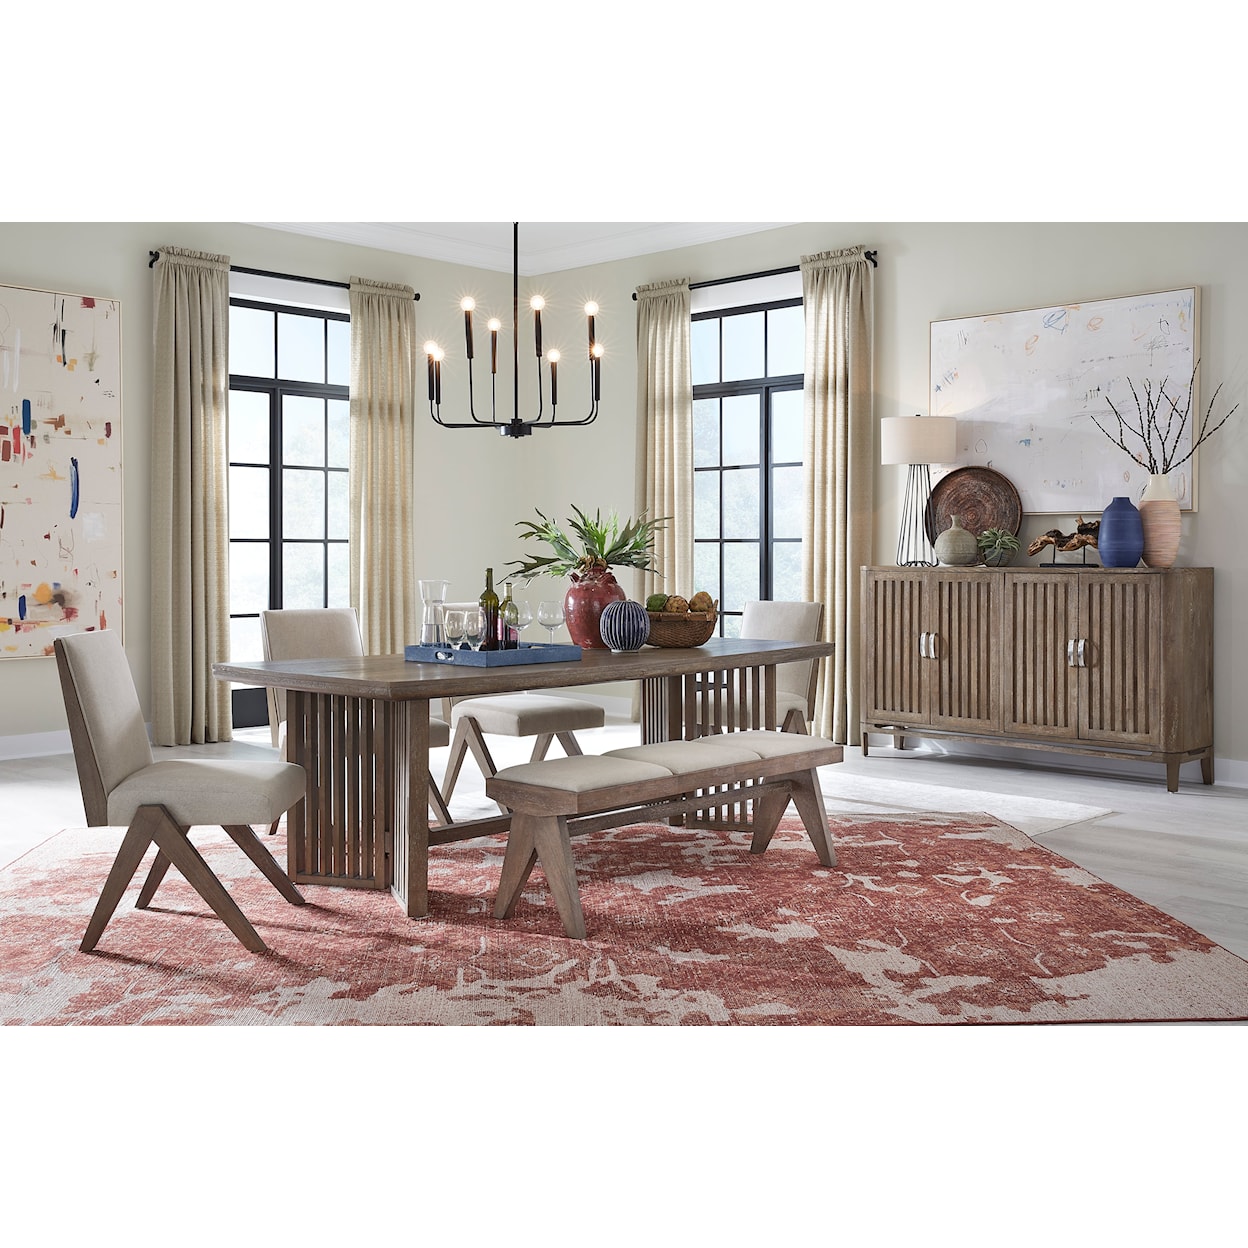 Magnussen Home Kavanaugh Dining Trestle Dining Table